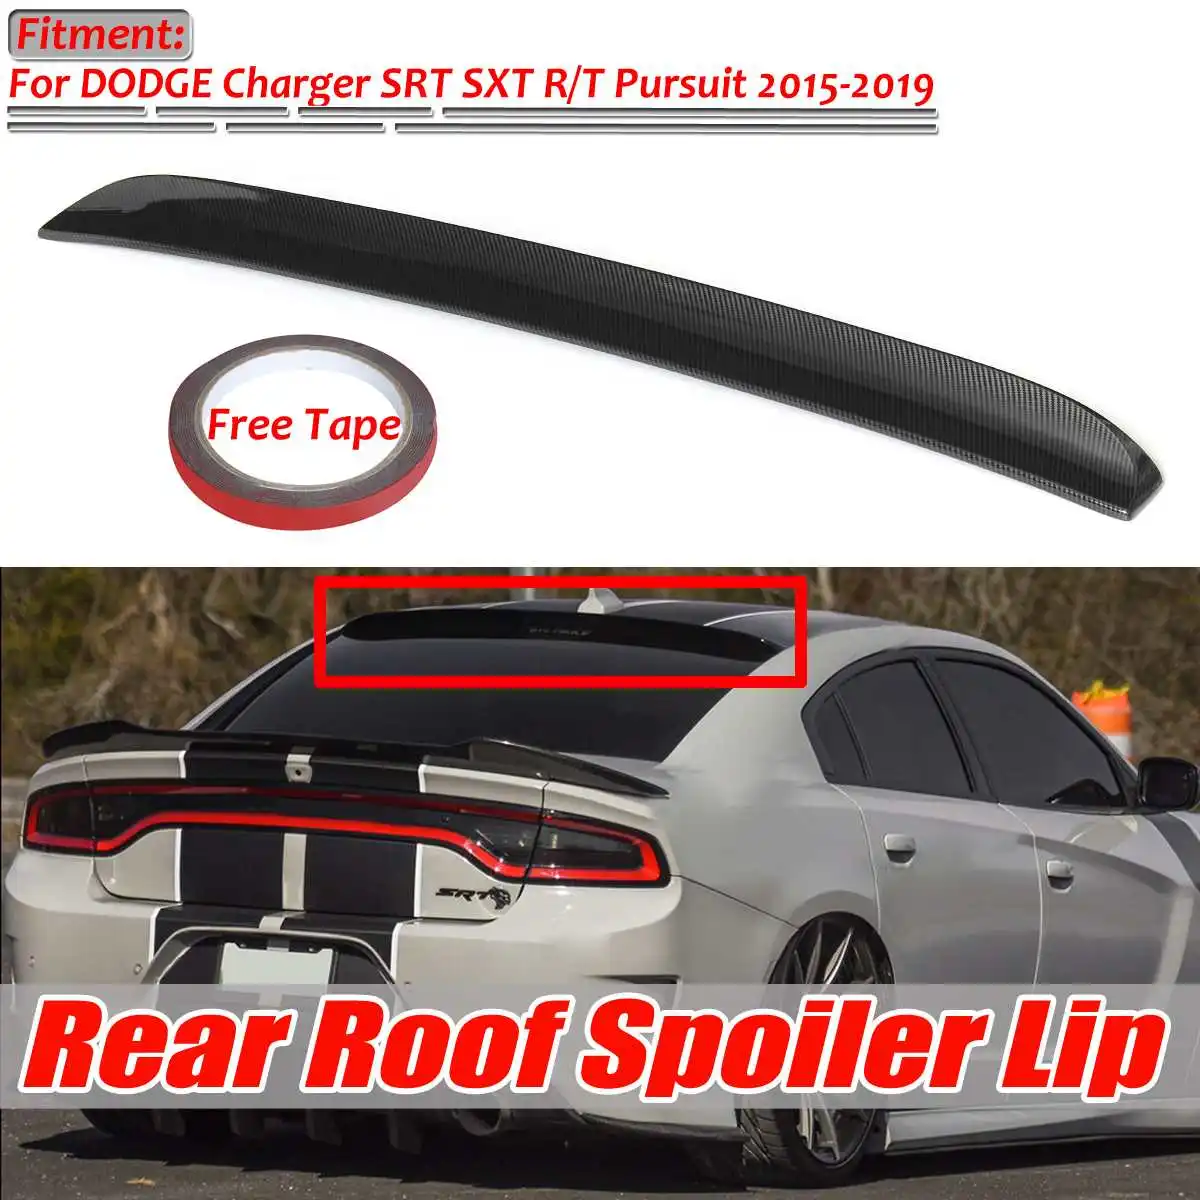 High Quality Car Rear Roof Lip Spoiler Wing For DODGE Charger SRT SXT R/T Pursuit 2015-2019 Rear Window Roof Spoiler Lip Cover